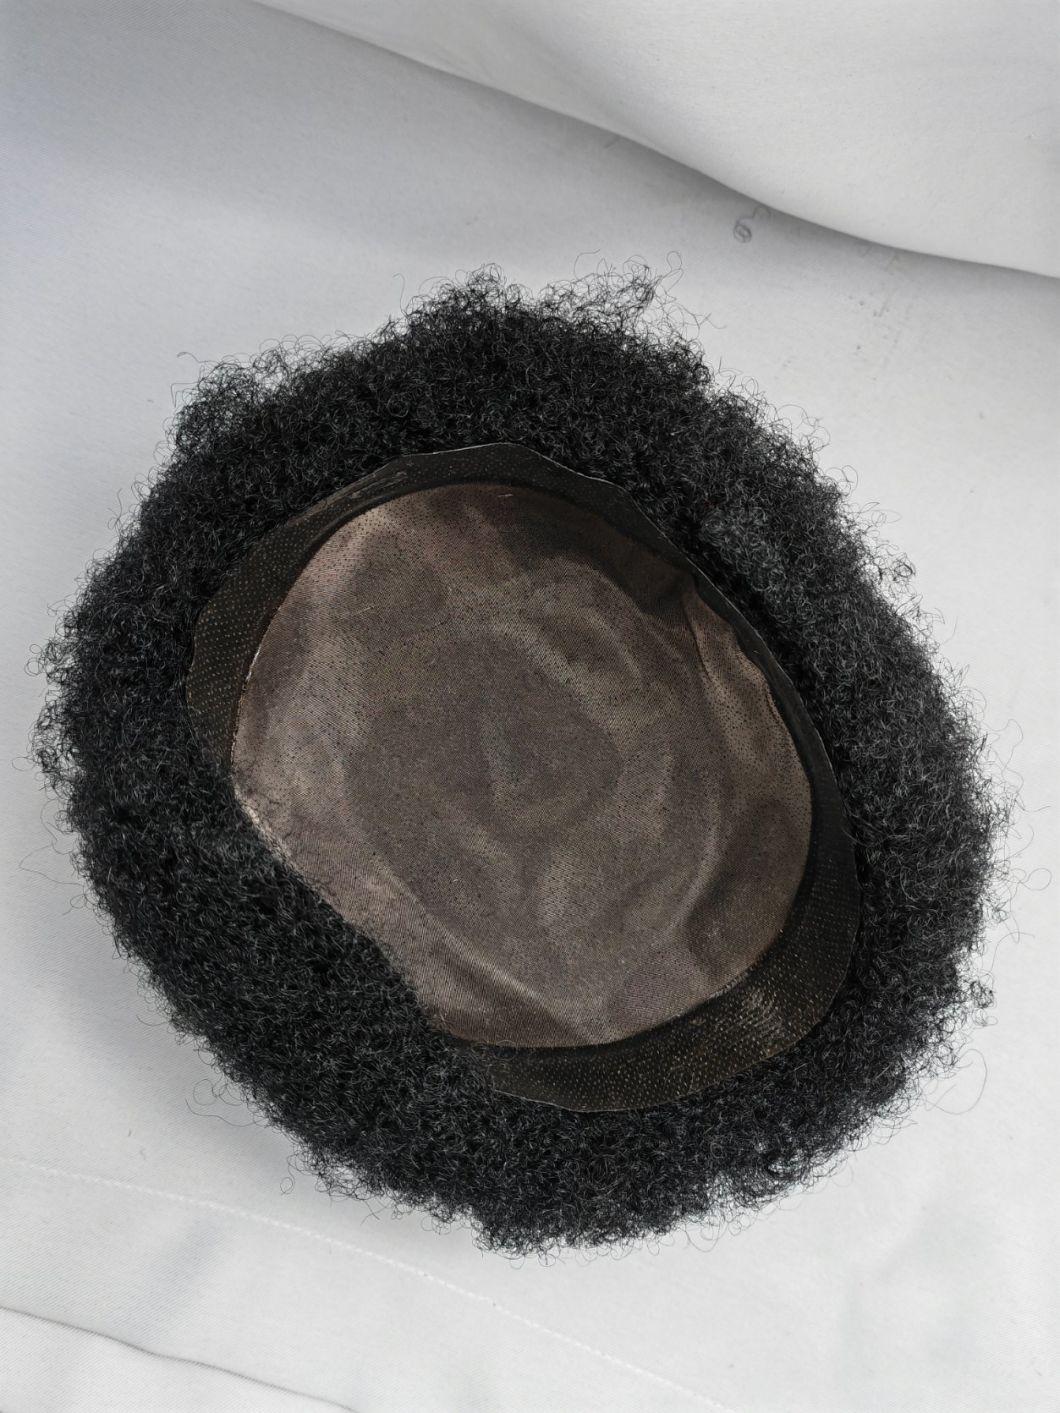 2022 Best Custom Made Natural Fine Mono Base Human Hair Toupee Made of Remy Human Hair